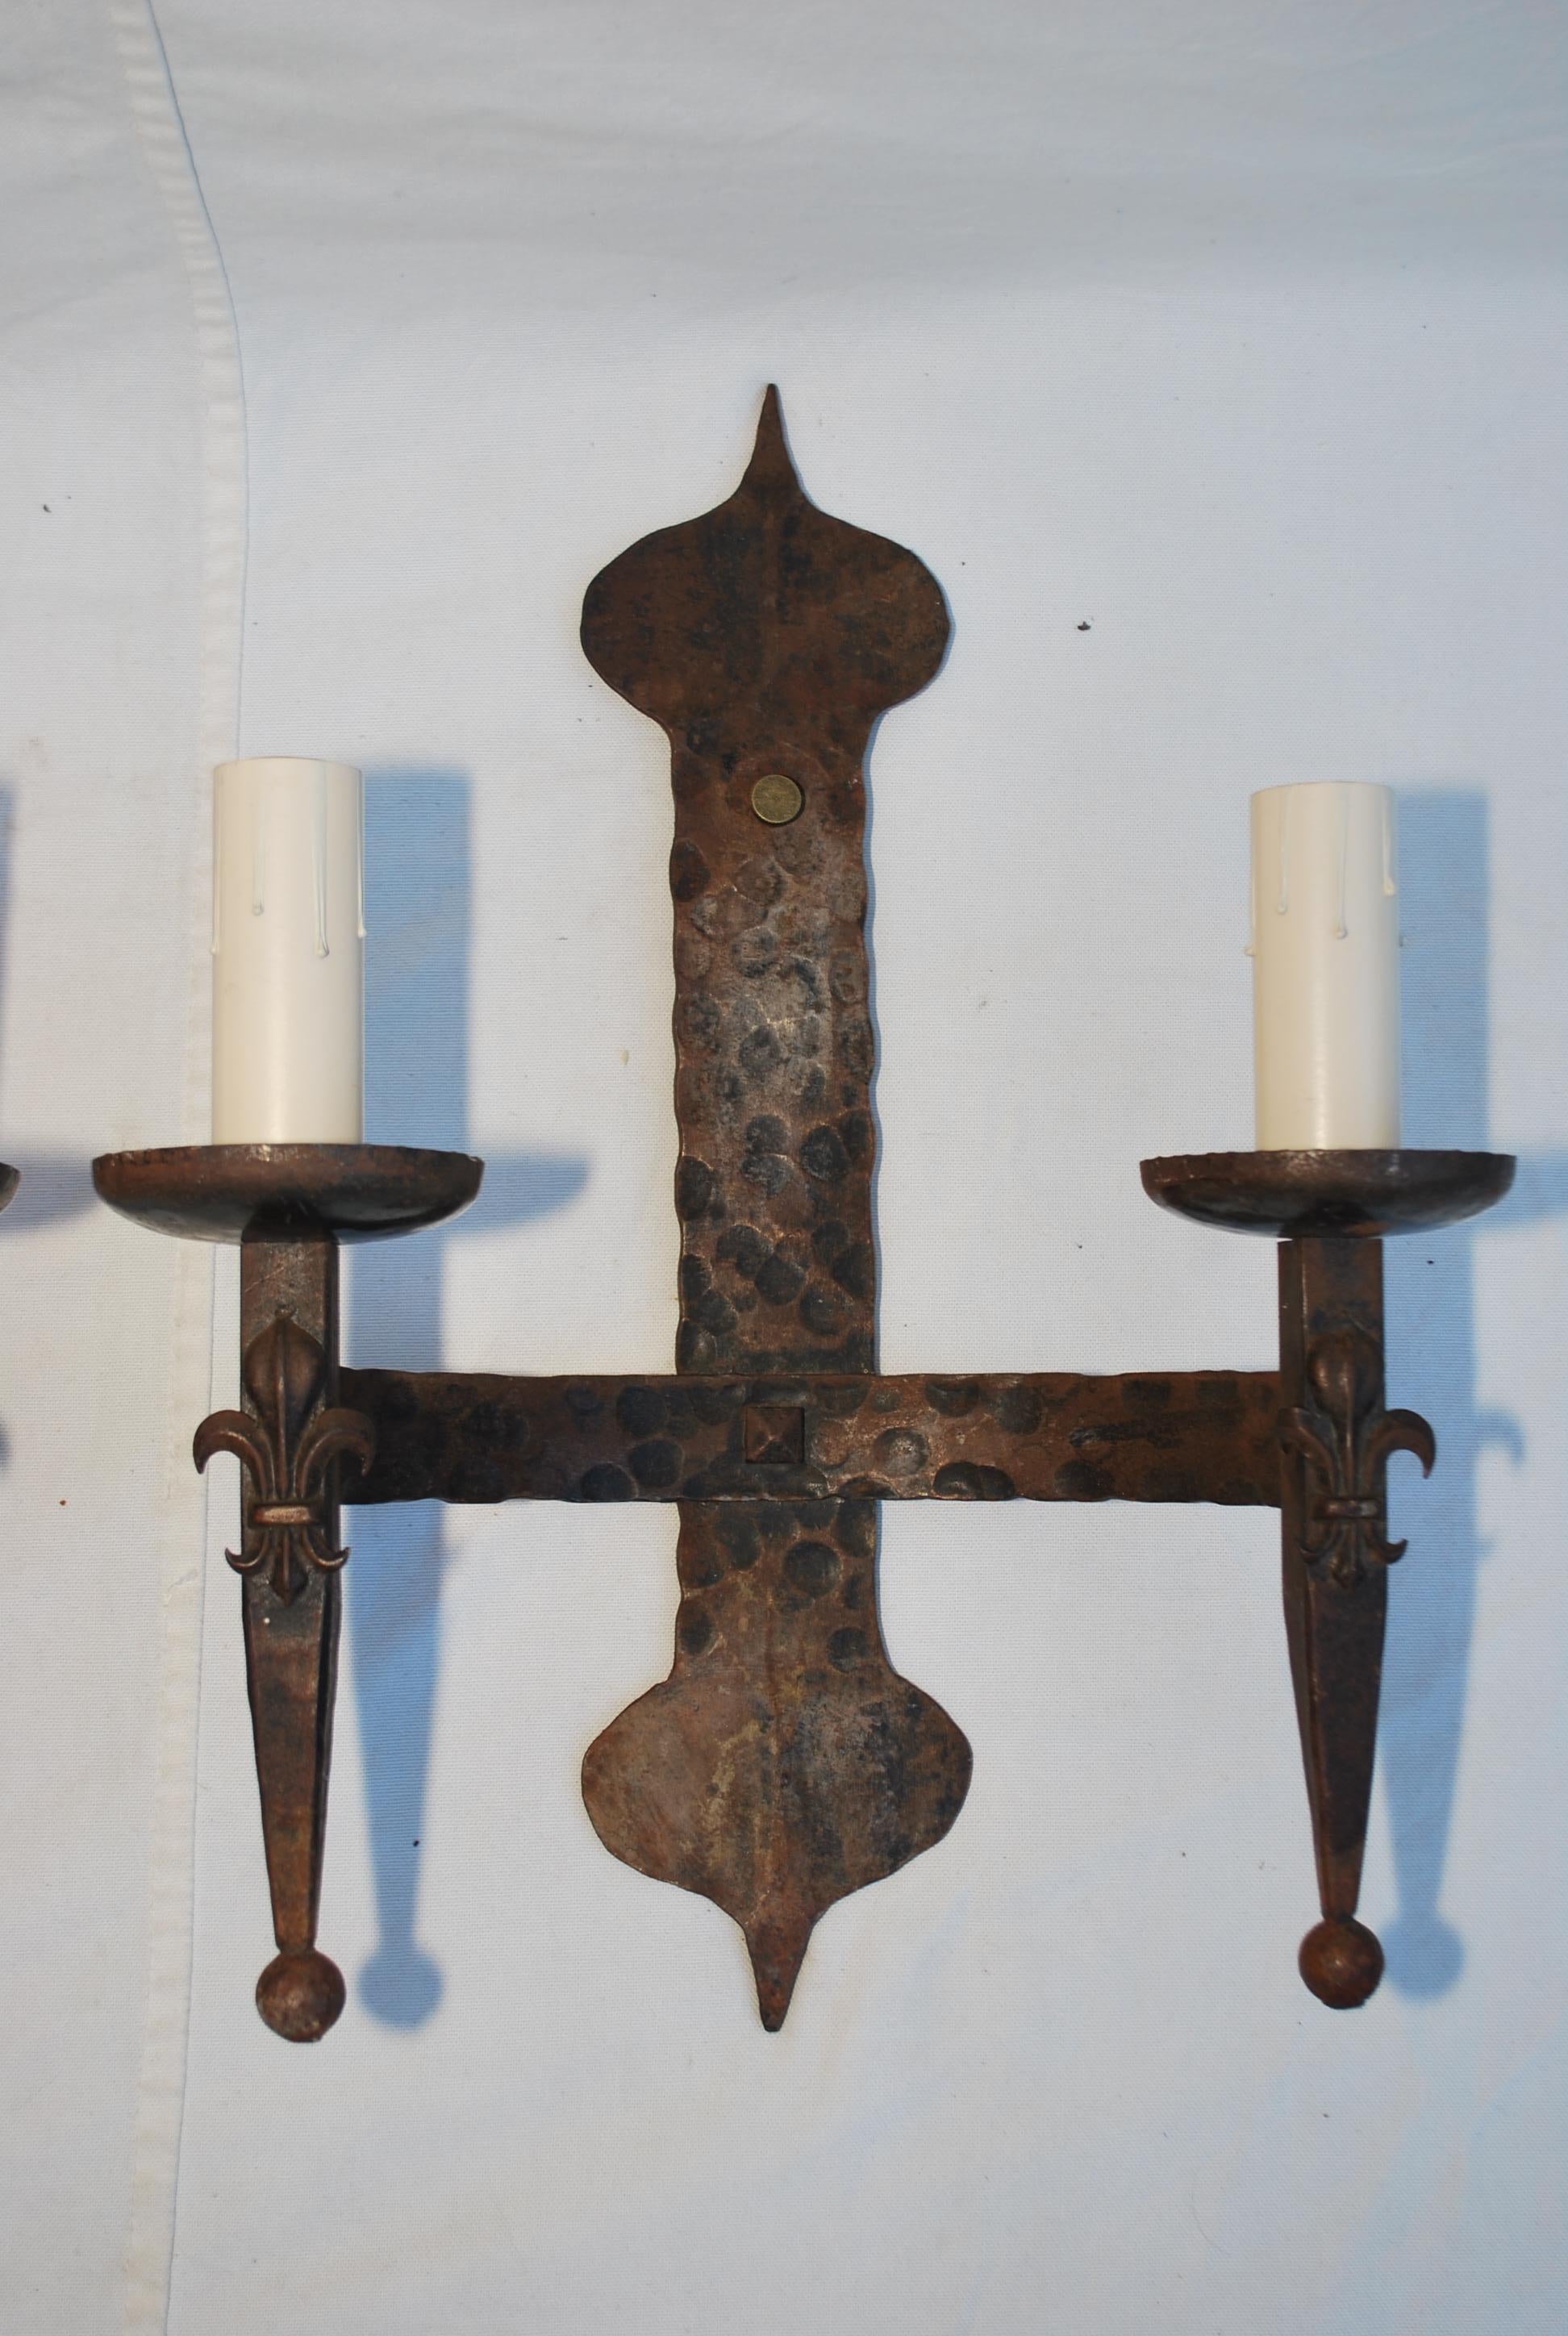 A very nice all hands made wrought iron sconces, the patina is so much nicer in person